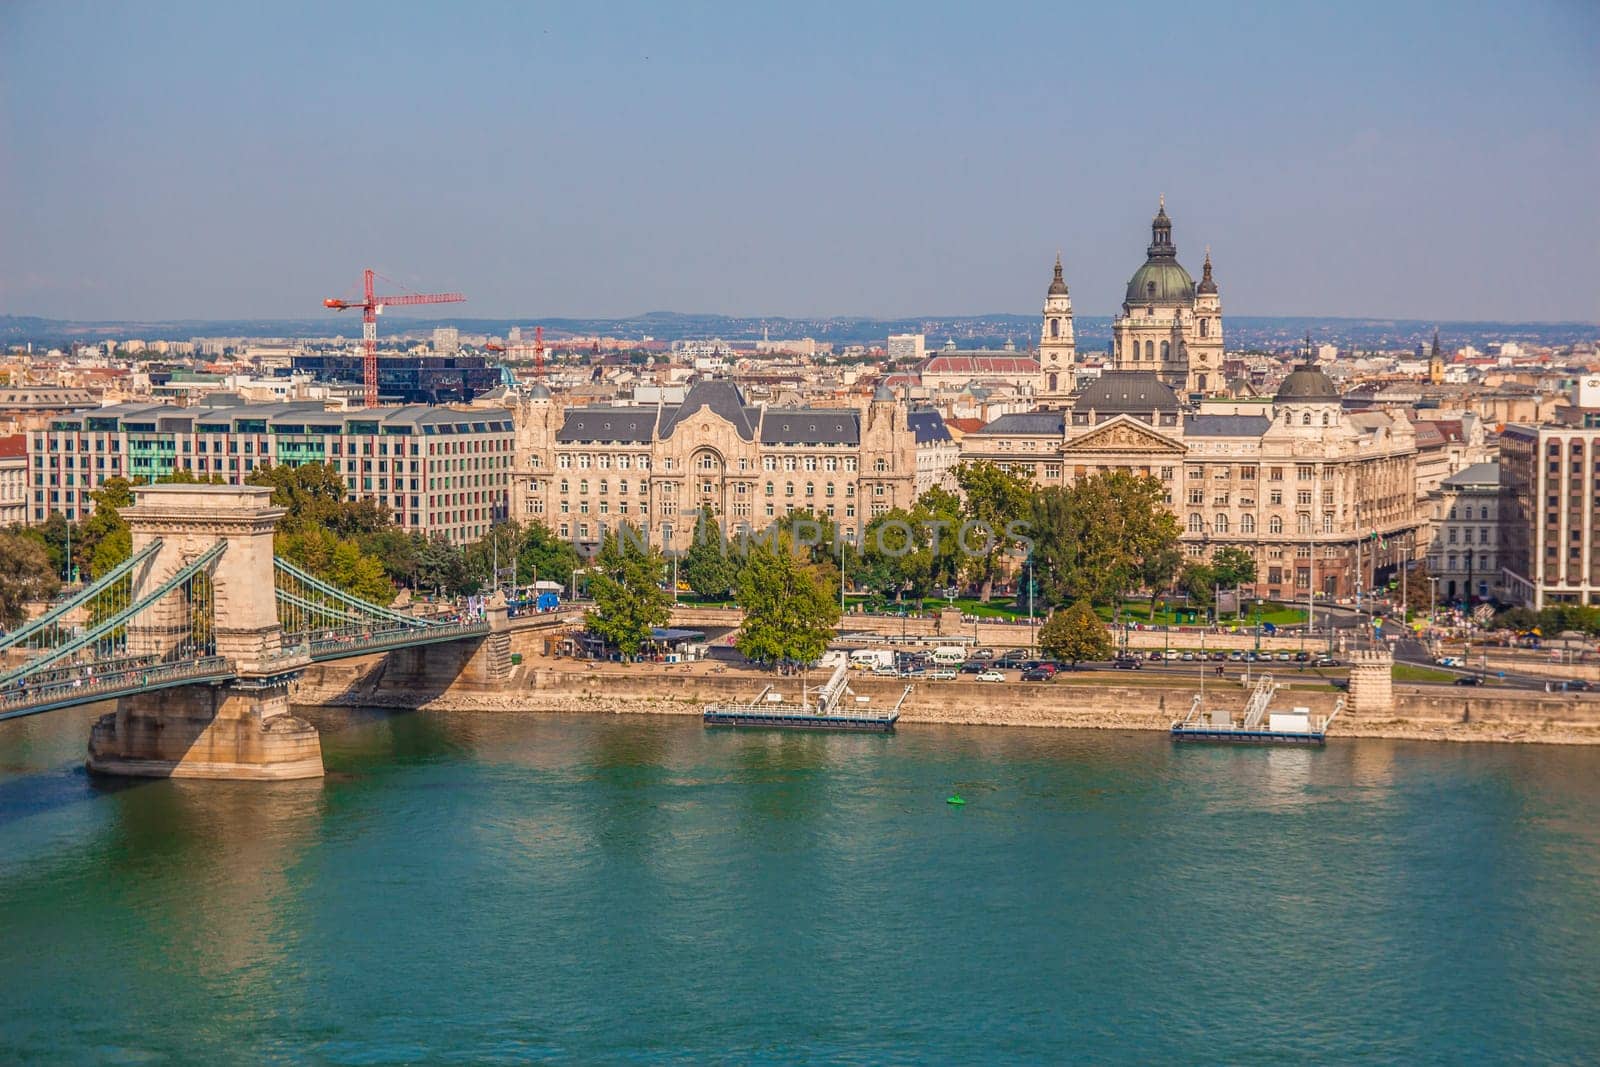 Budapest cityscape, including chain bridge, St Stephen's Basilica, Ministry of the Interior, the Four Seasons Hotel and the Danube river in Budapest, Hungary
